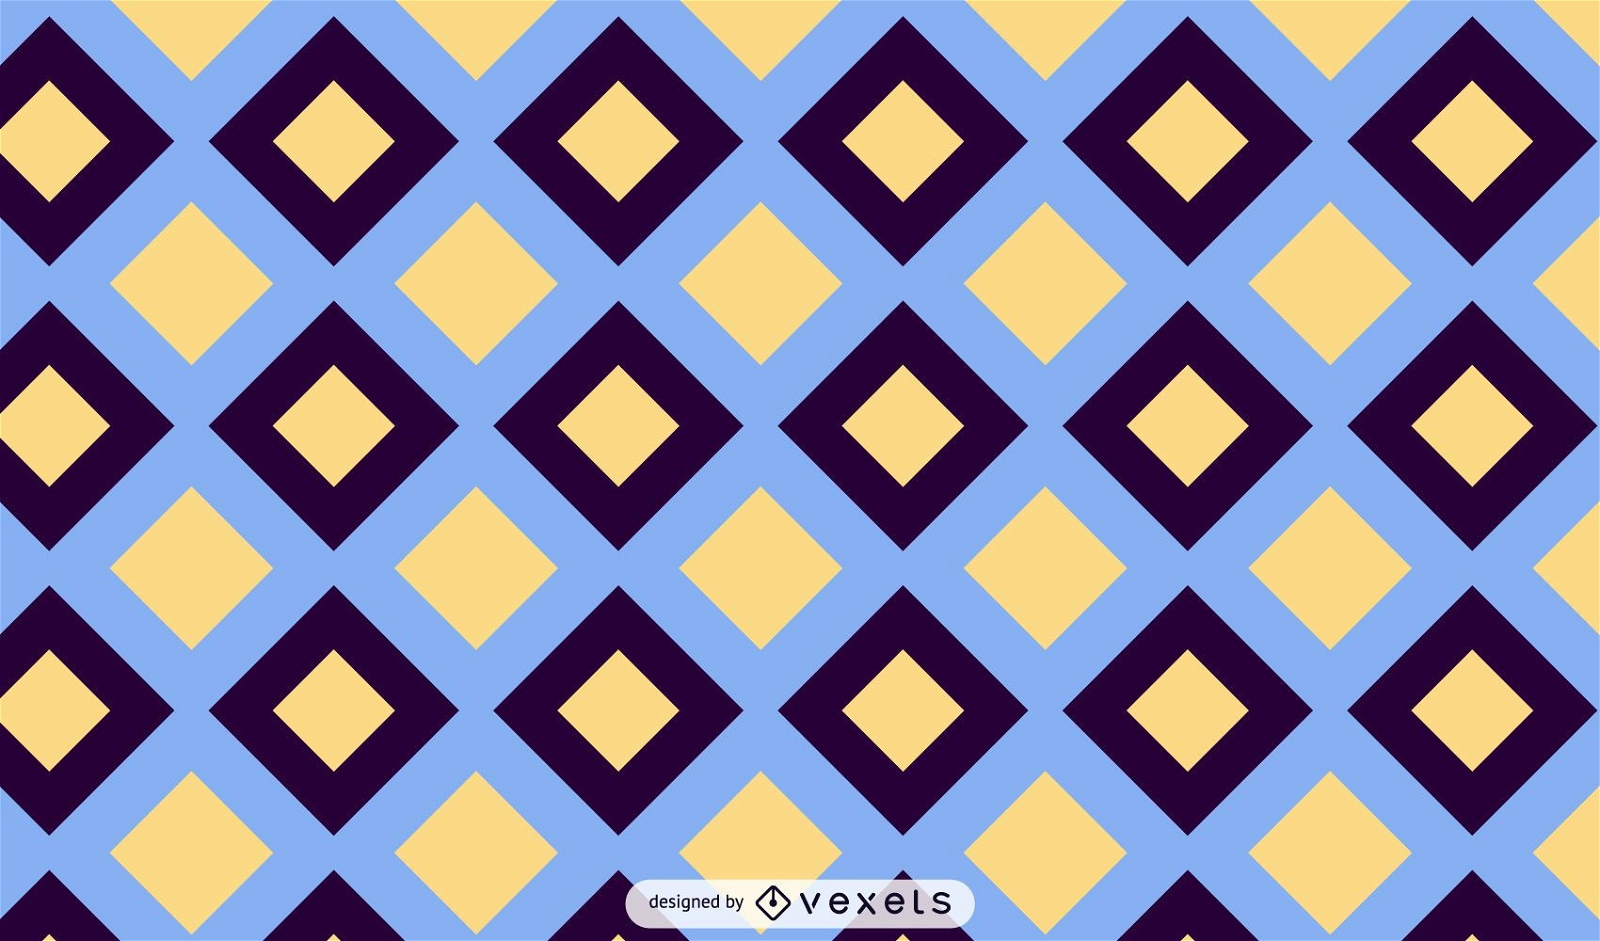 Abstract Geometric Square Pattern Design